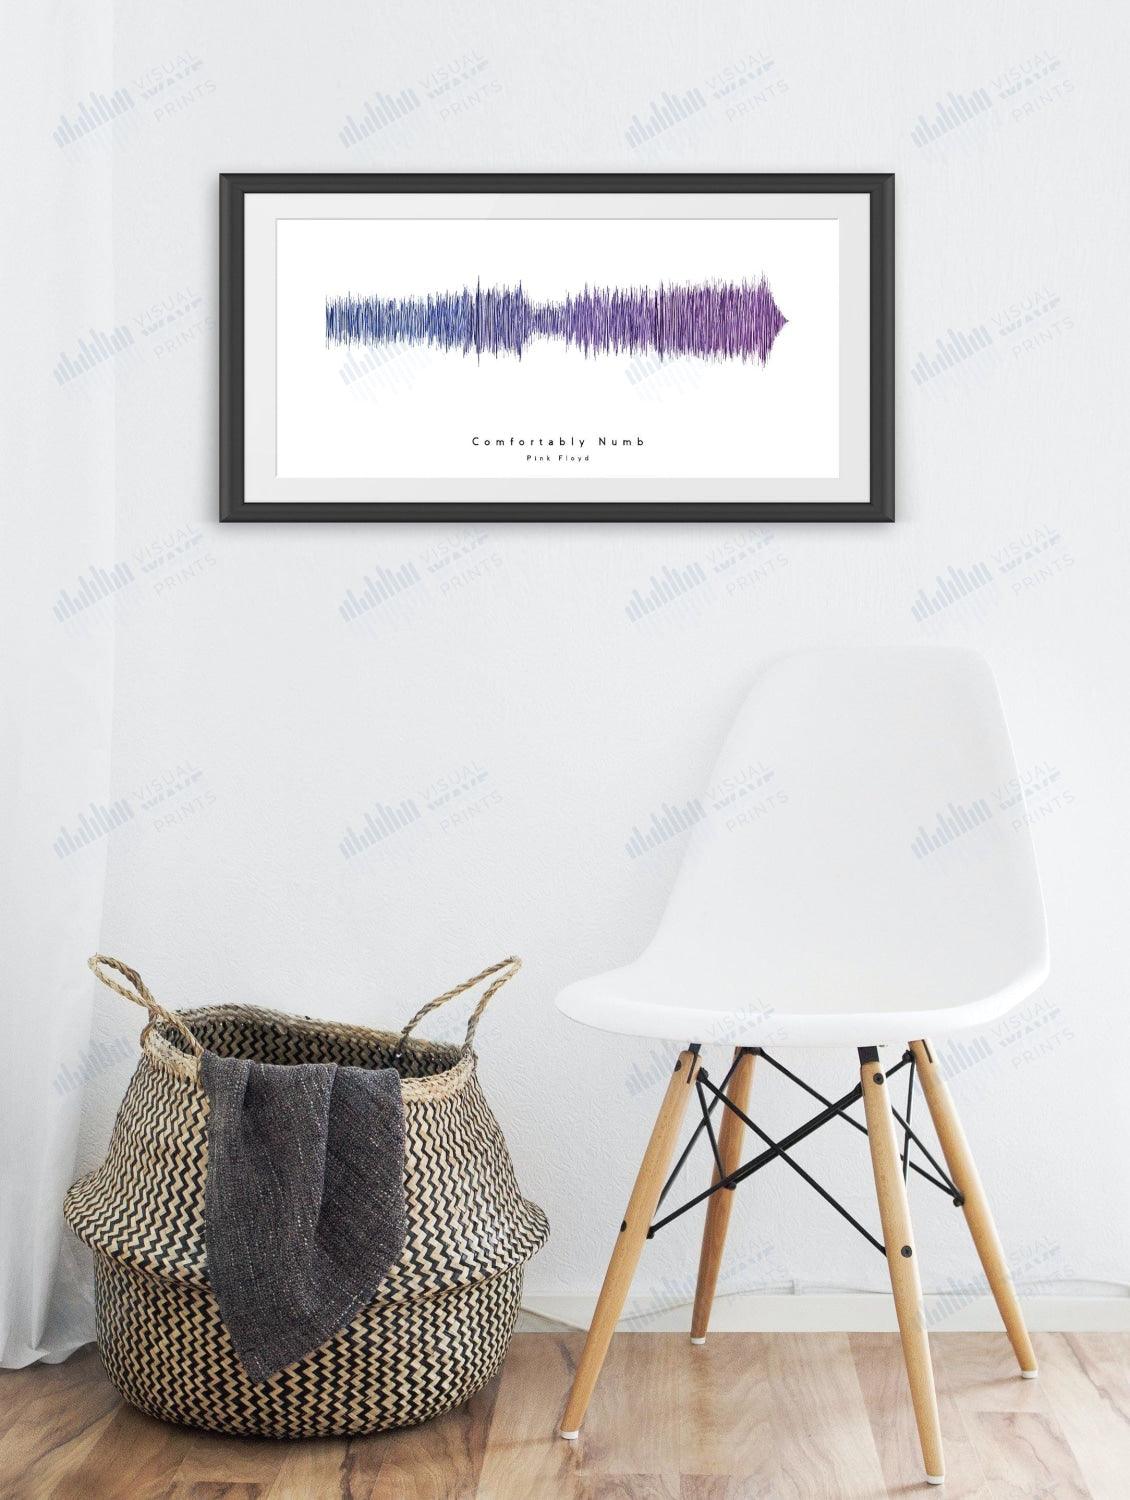 Comfortably Numb by Pink Floyd - Visual Wave Prints